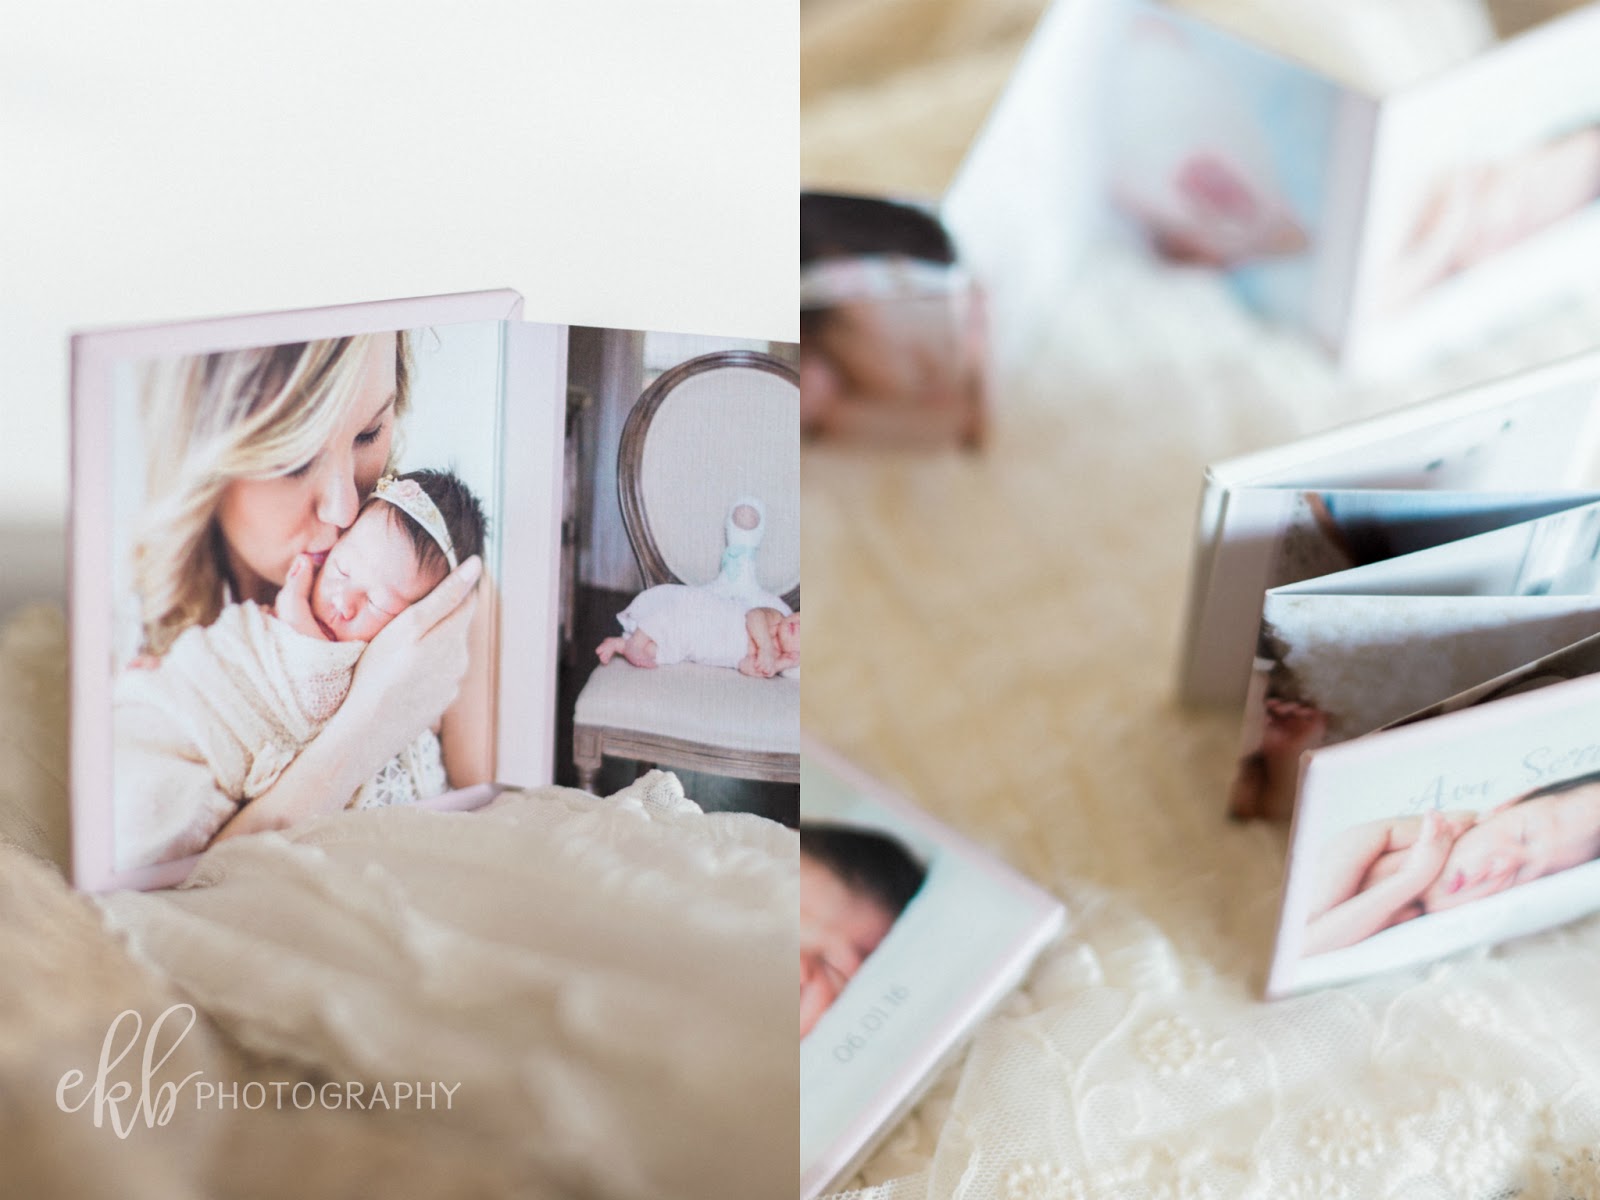 ekbphotography: pictures you can hold | accordion mini albums